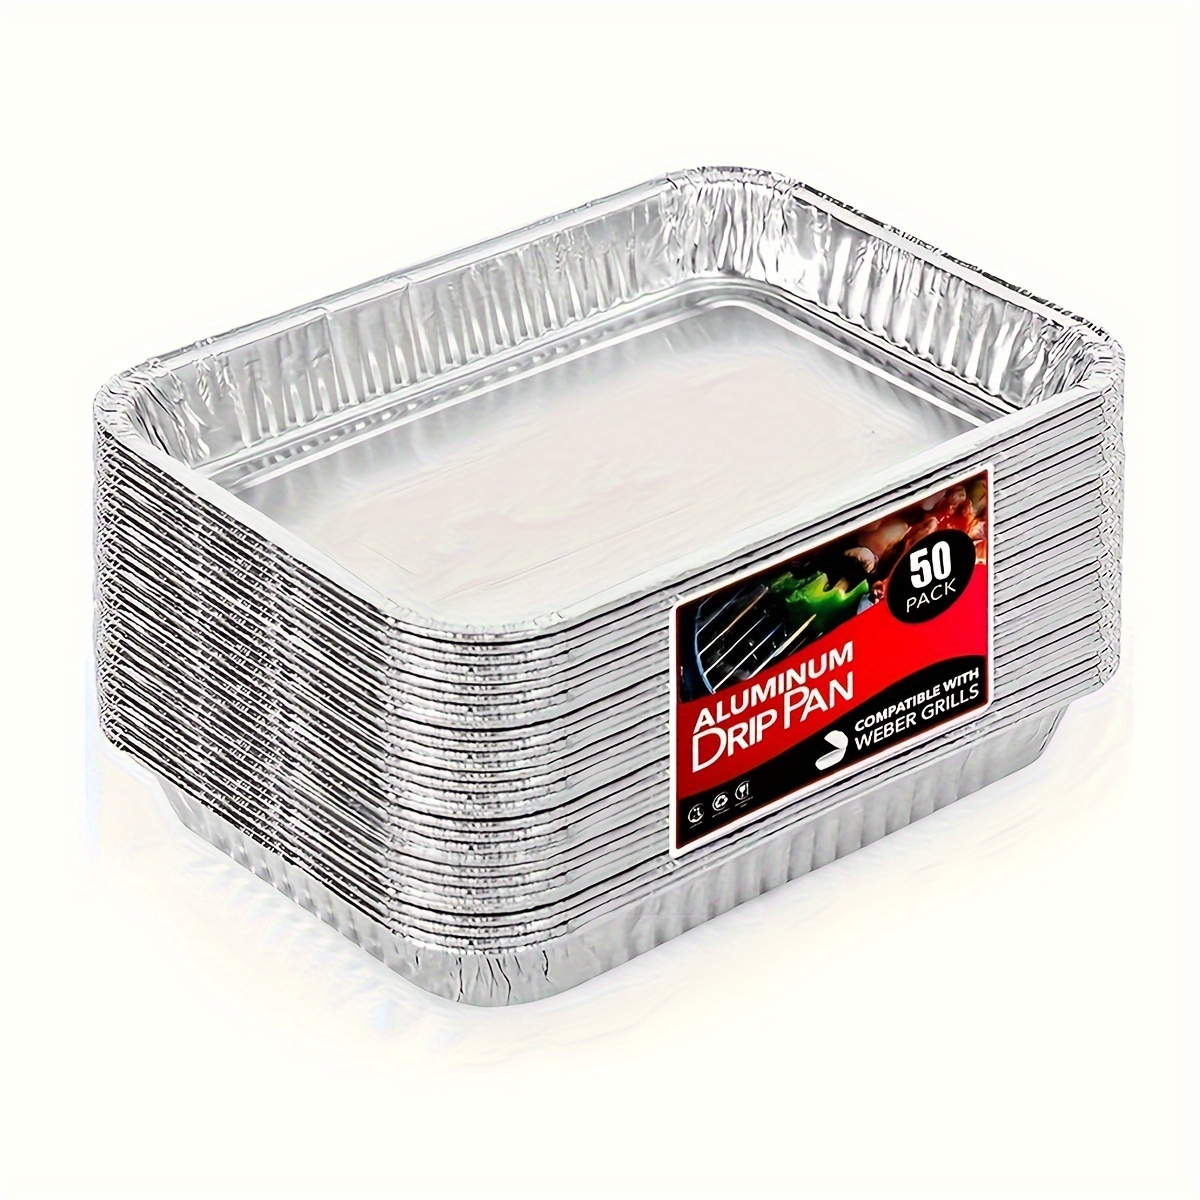 

15/50 Pcs, Aluminum Drip Pan, Disposable Foil Liner, Compatible With Weber Grills, Dripping Pans, Bbq Grease Tray To Catch Oil, Fit For Outdoor